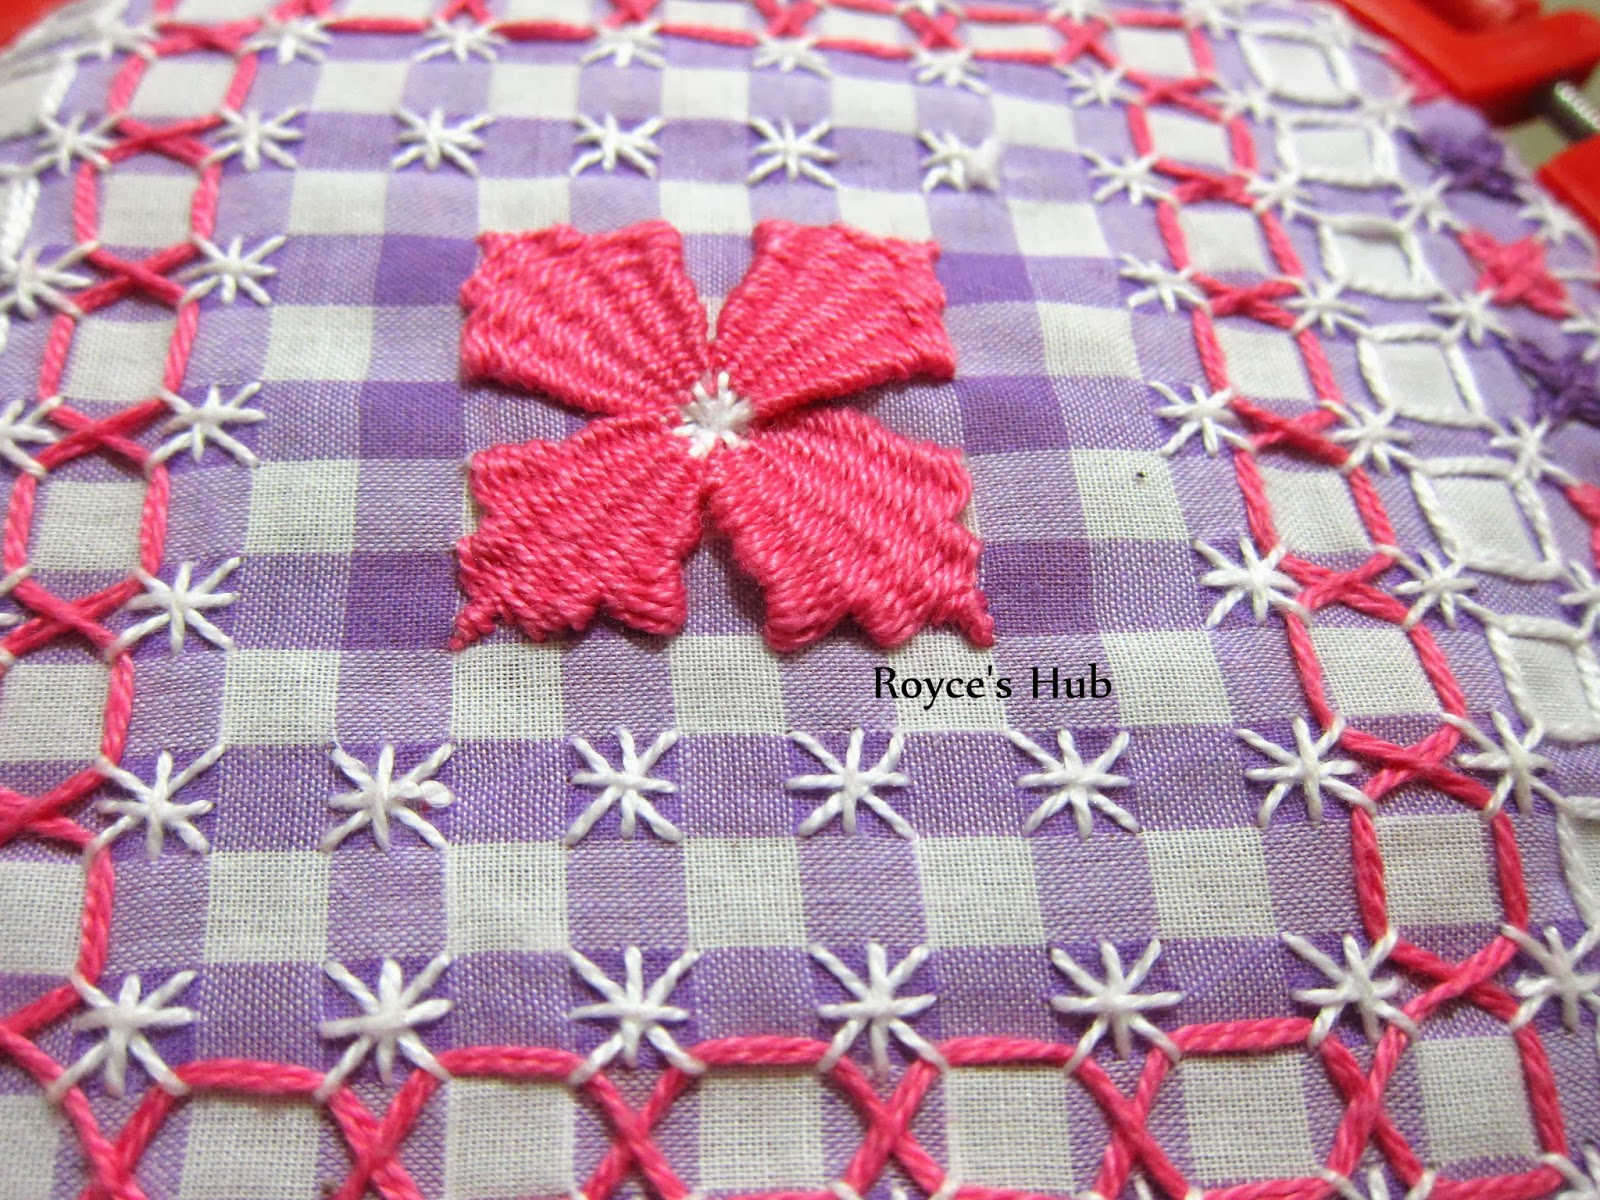 Gingham Embroidery Patterns Royces Hub Gingham Embroidery Stitches Needle Weaving